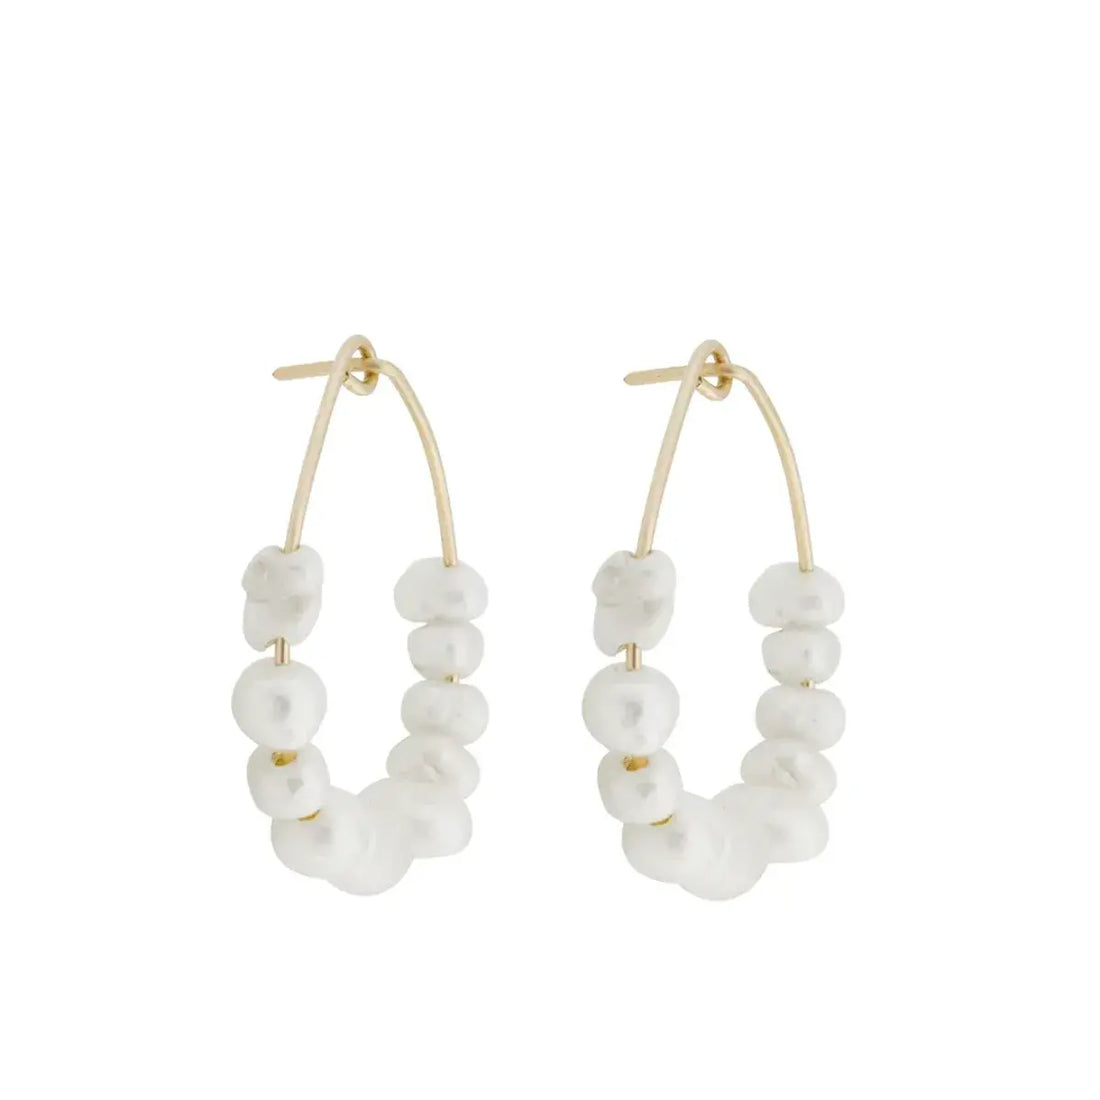 The Venus Pearl Hoops by Made by a. in Sold Gold 